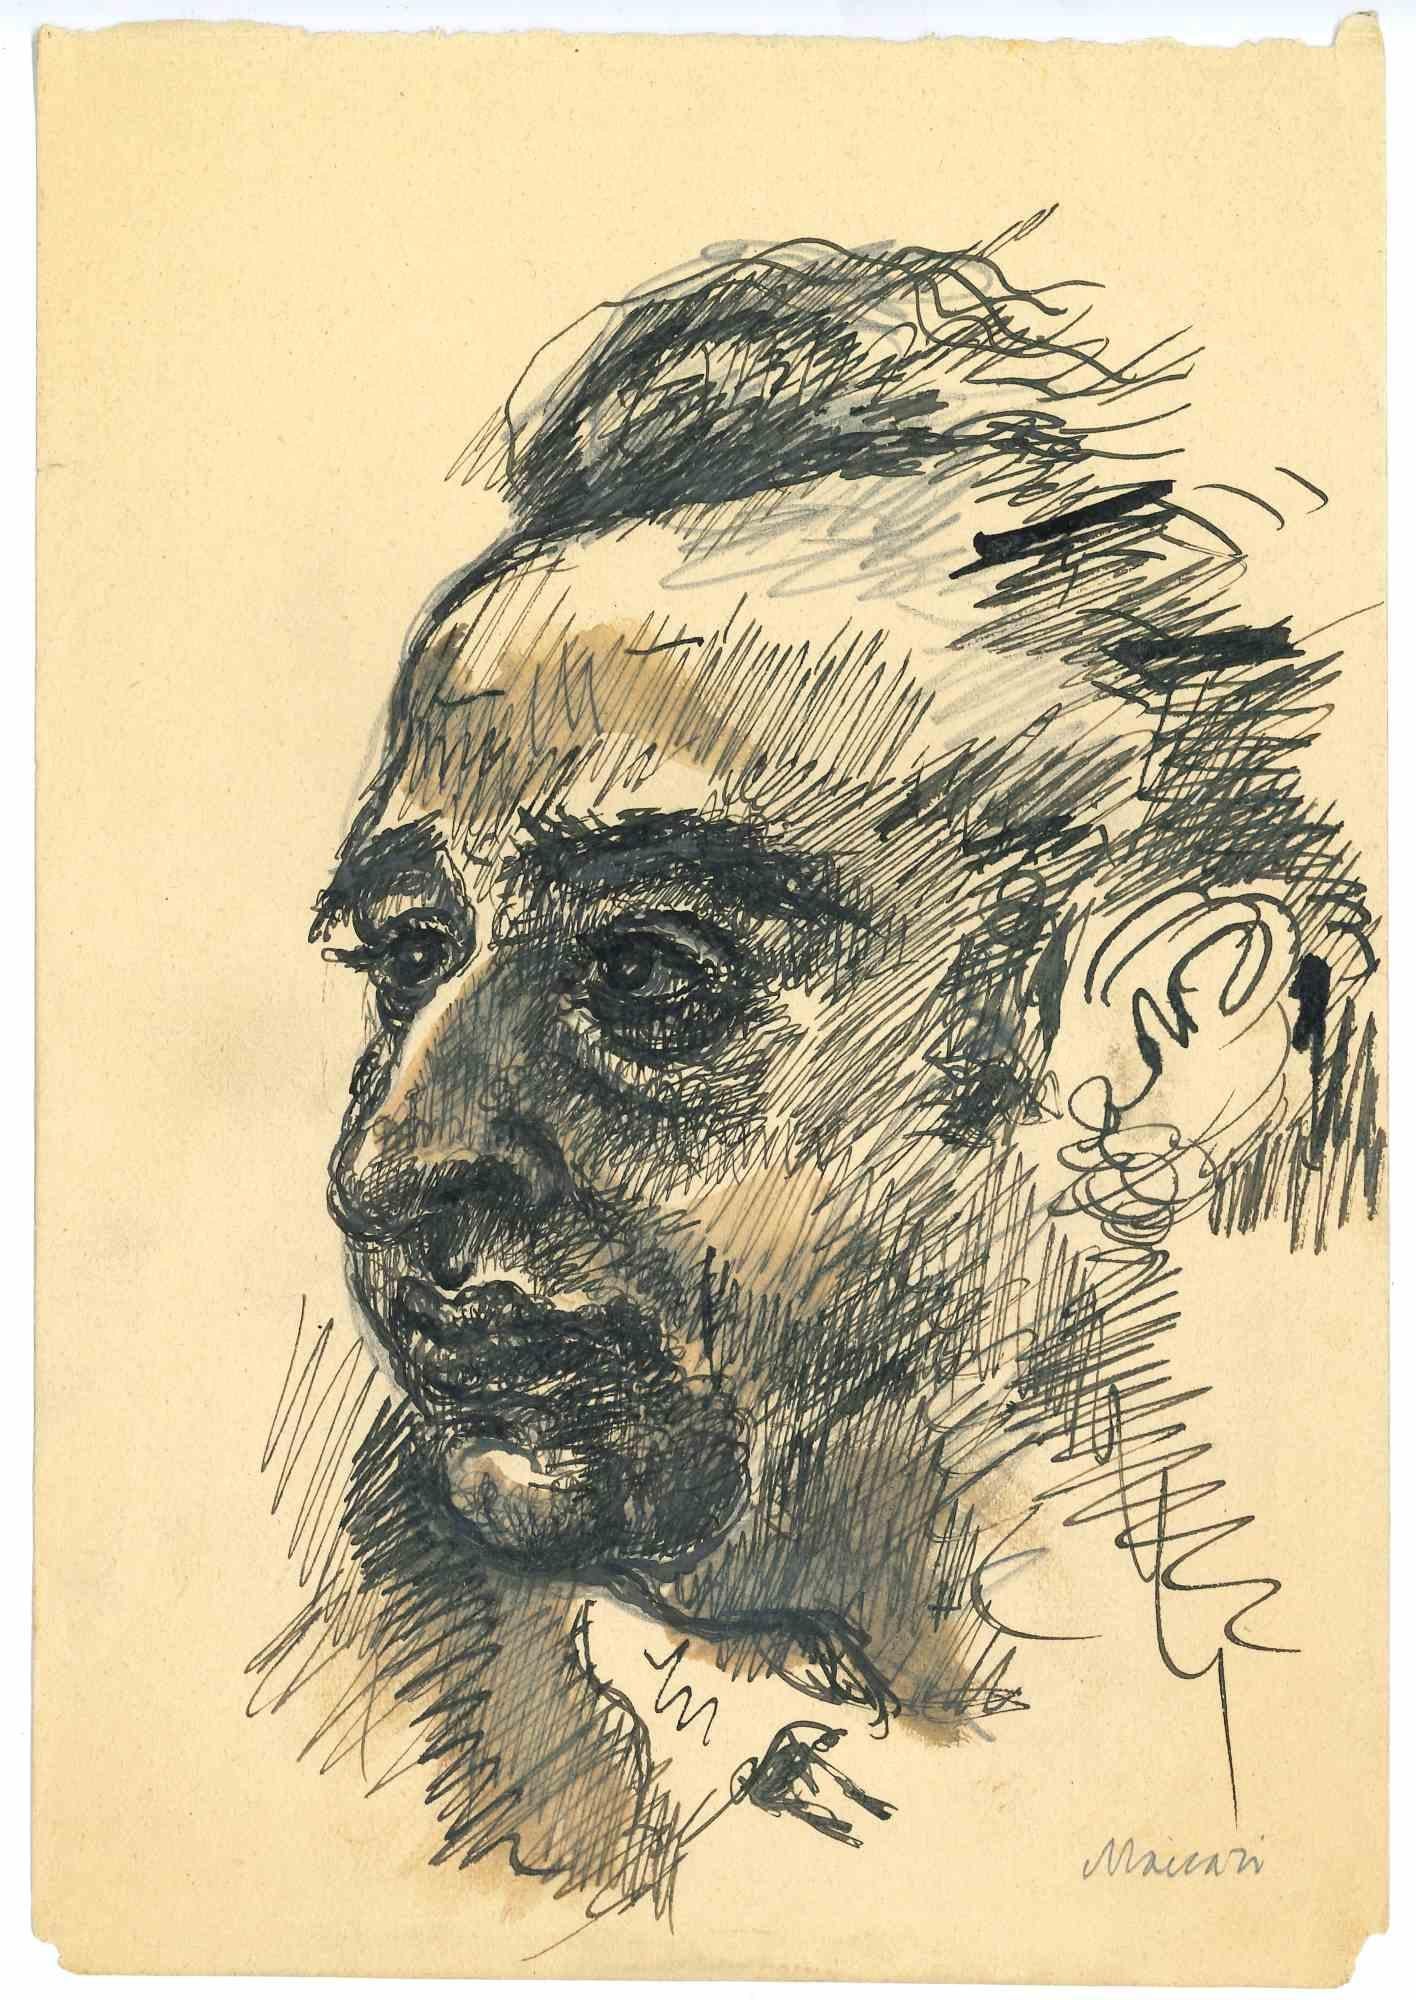 The Portrait - Drawing by Mino Maccari - Mid-20th Century